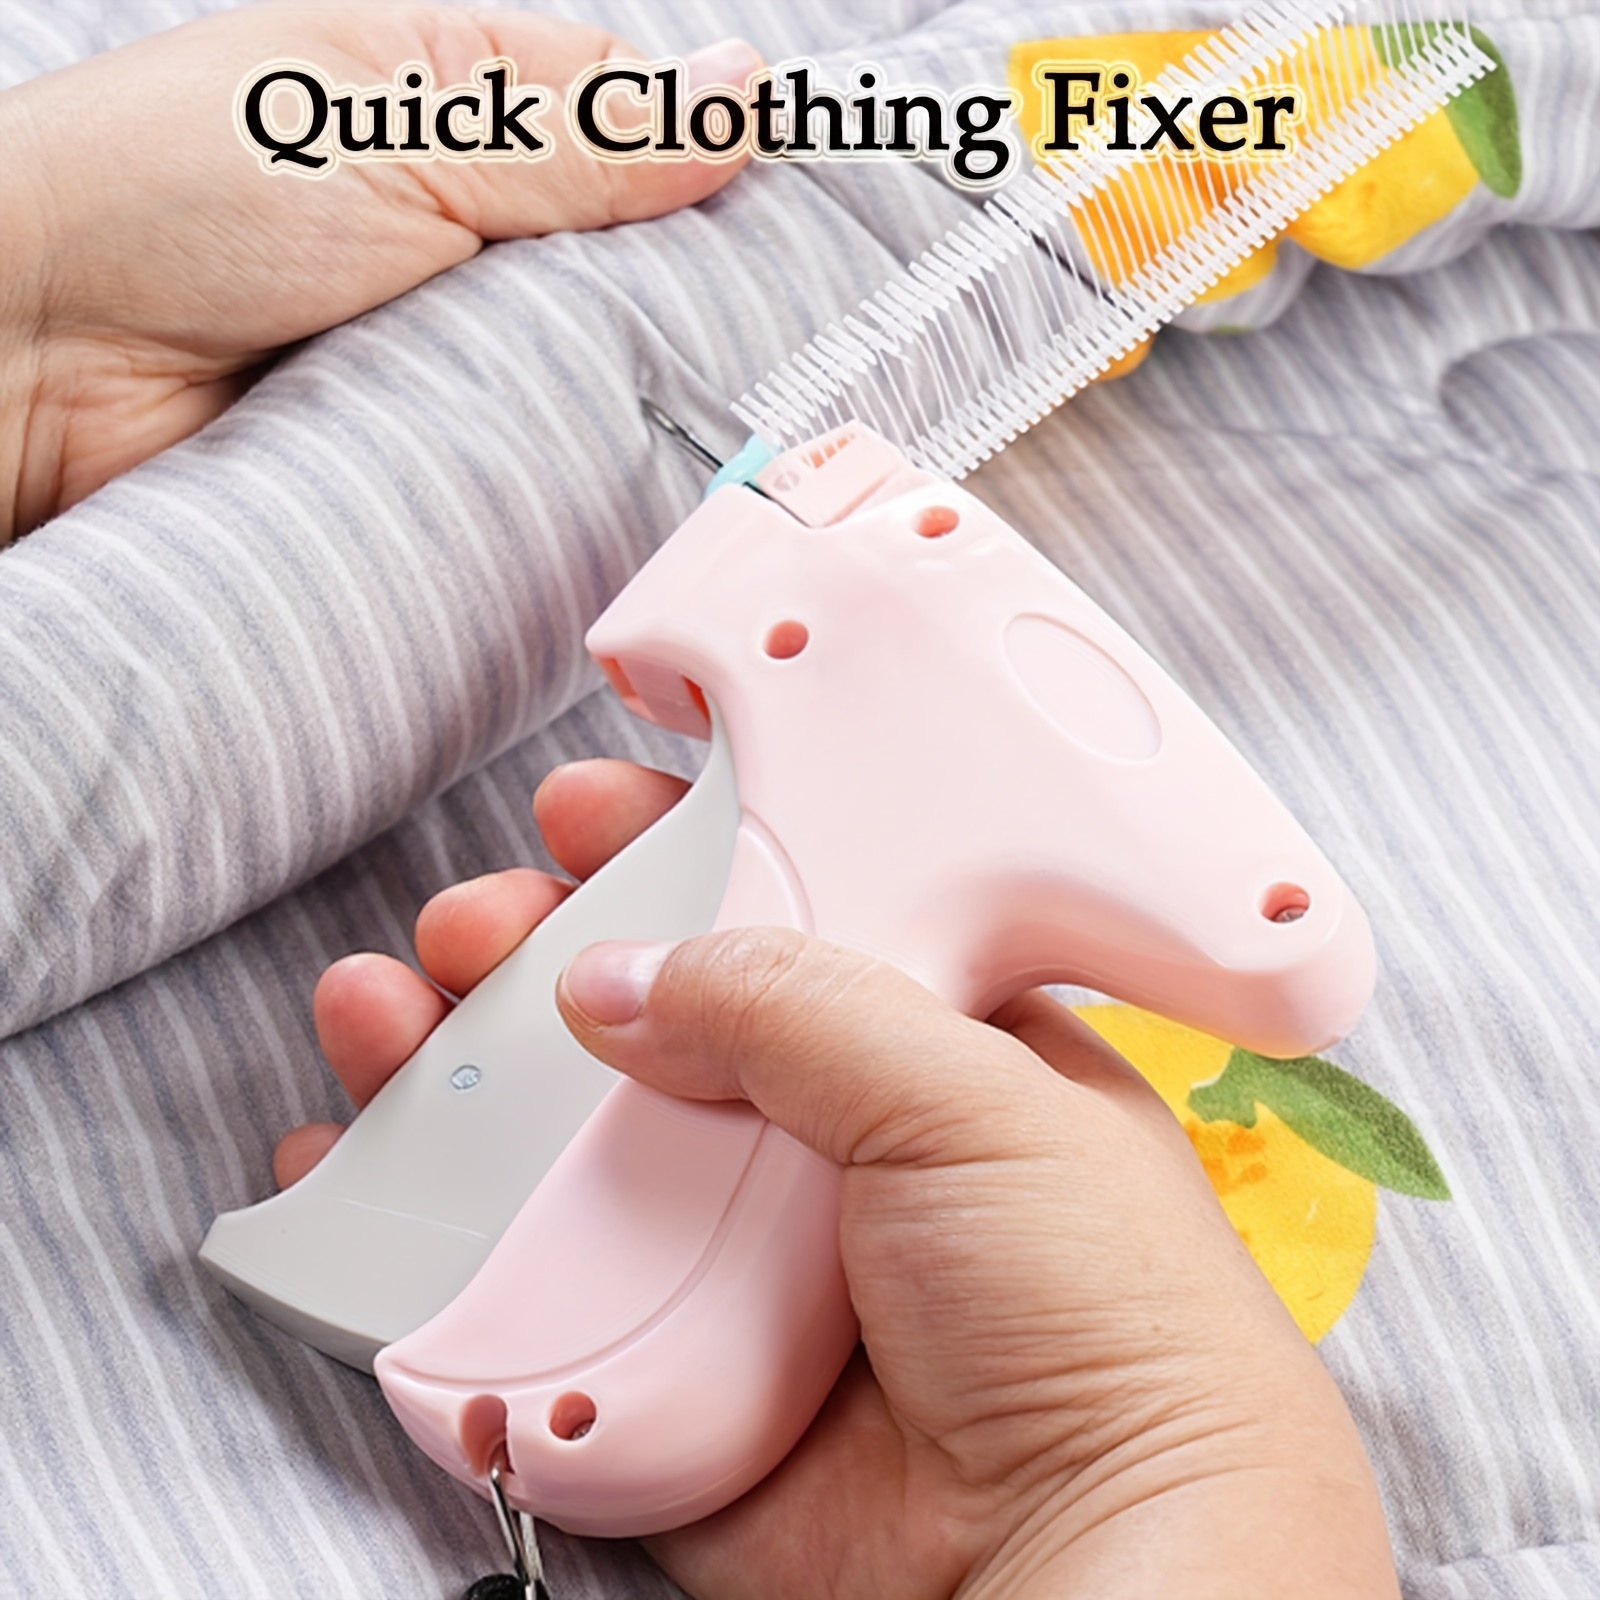 

Portable Pink Quick Stitch Sewing Gun - Easy-to-use, Time-saving Clothing Repair Tool For Hemming & Garment Fixes - Compact & Lightweight For Home Or Travel Use